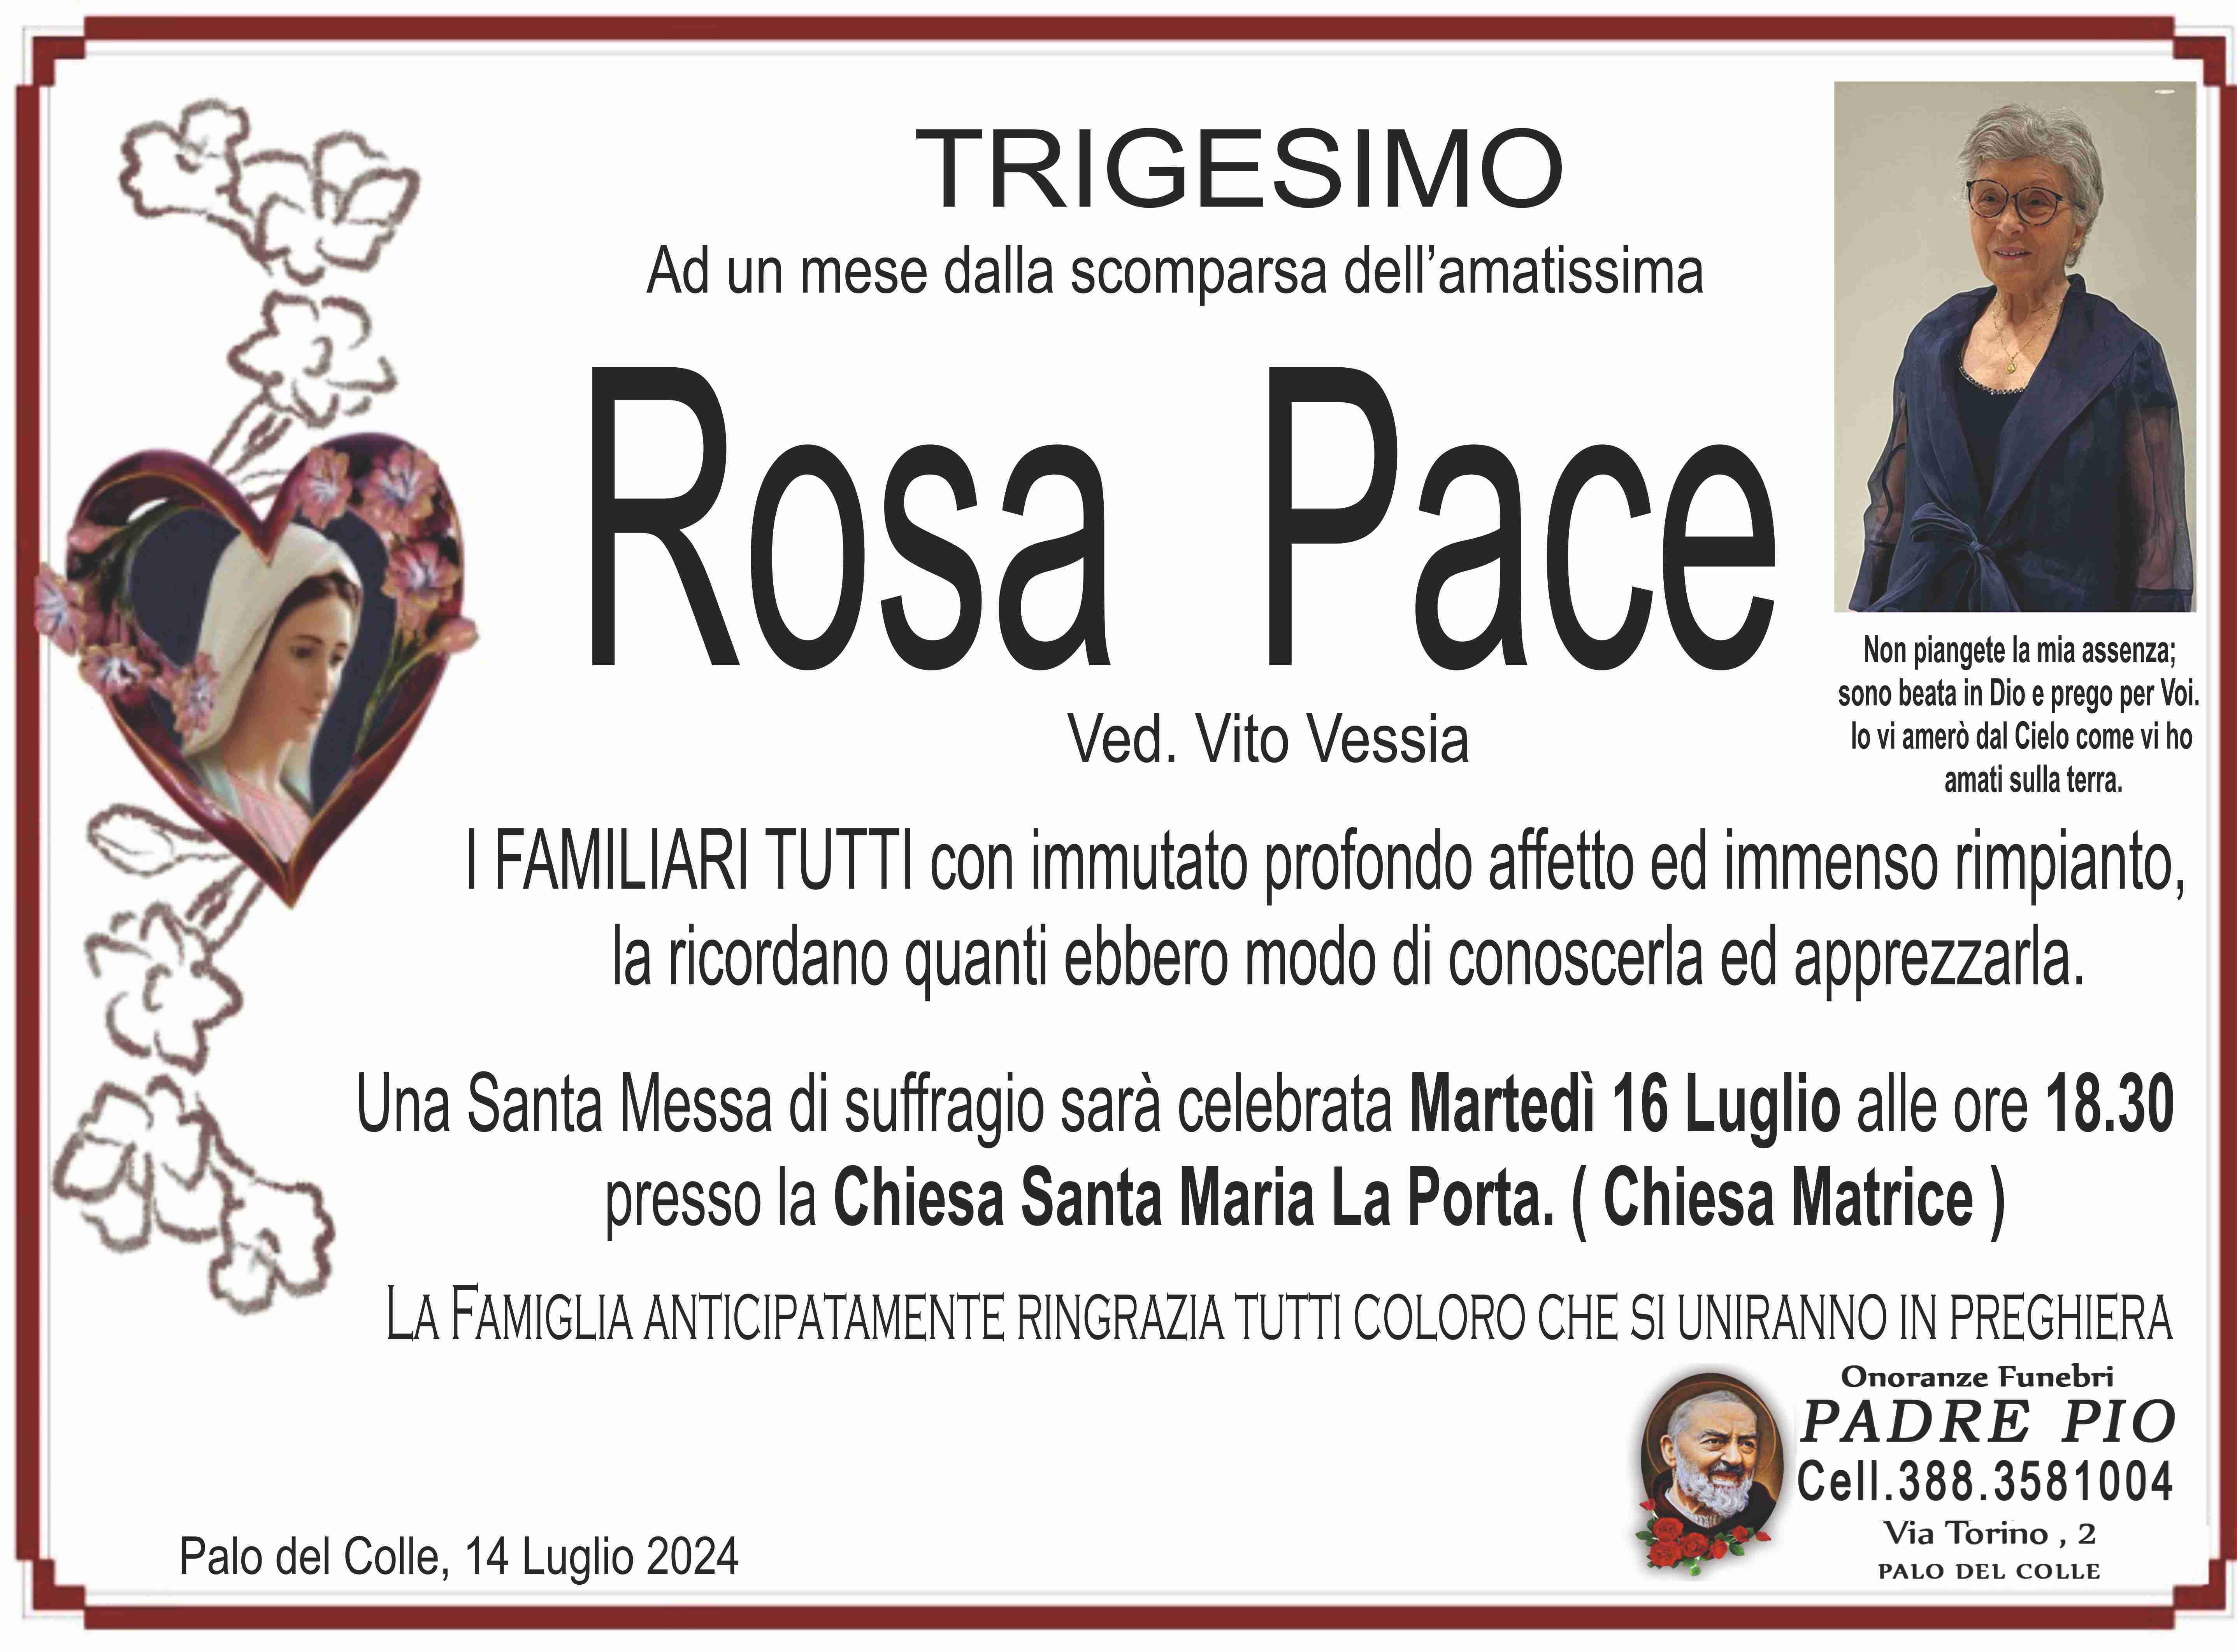 Rosa Pace